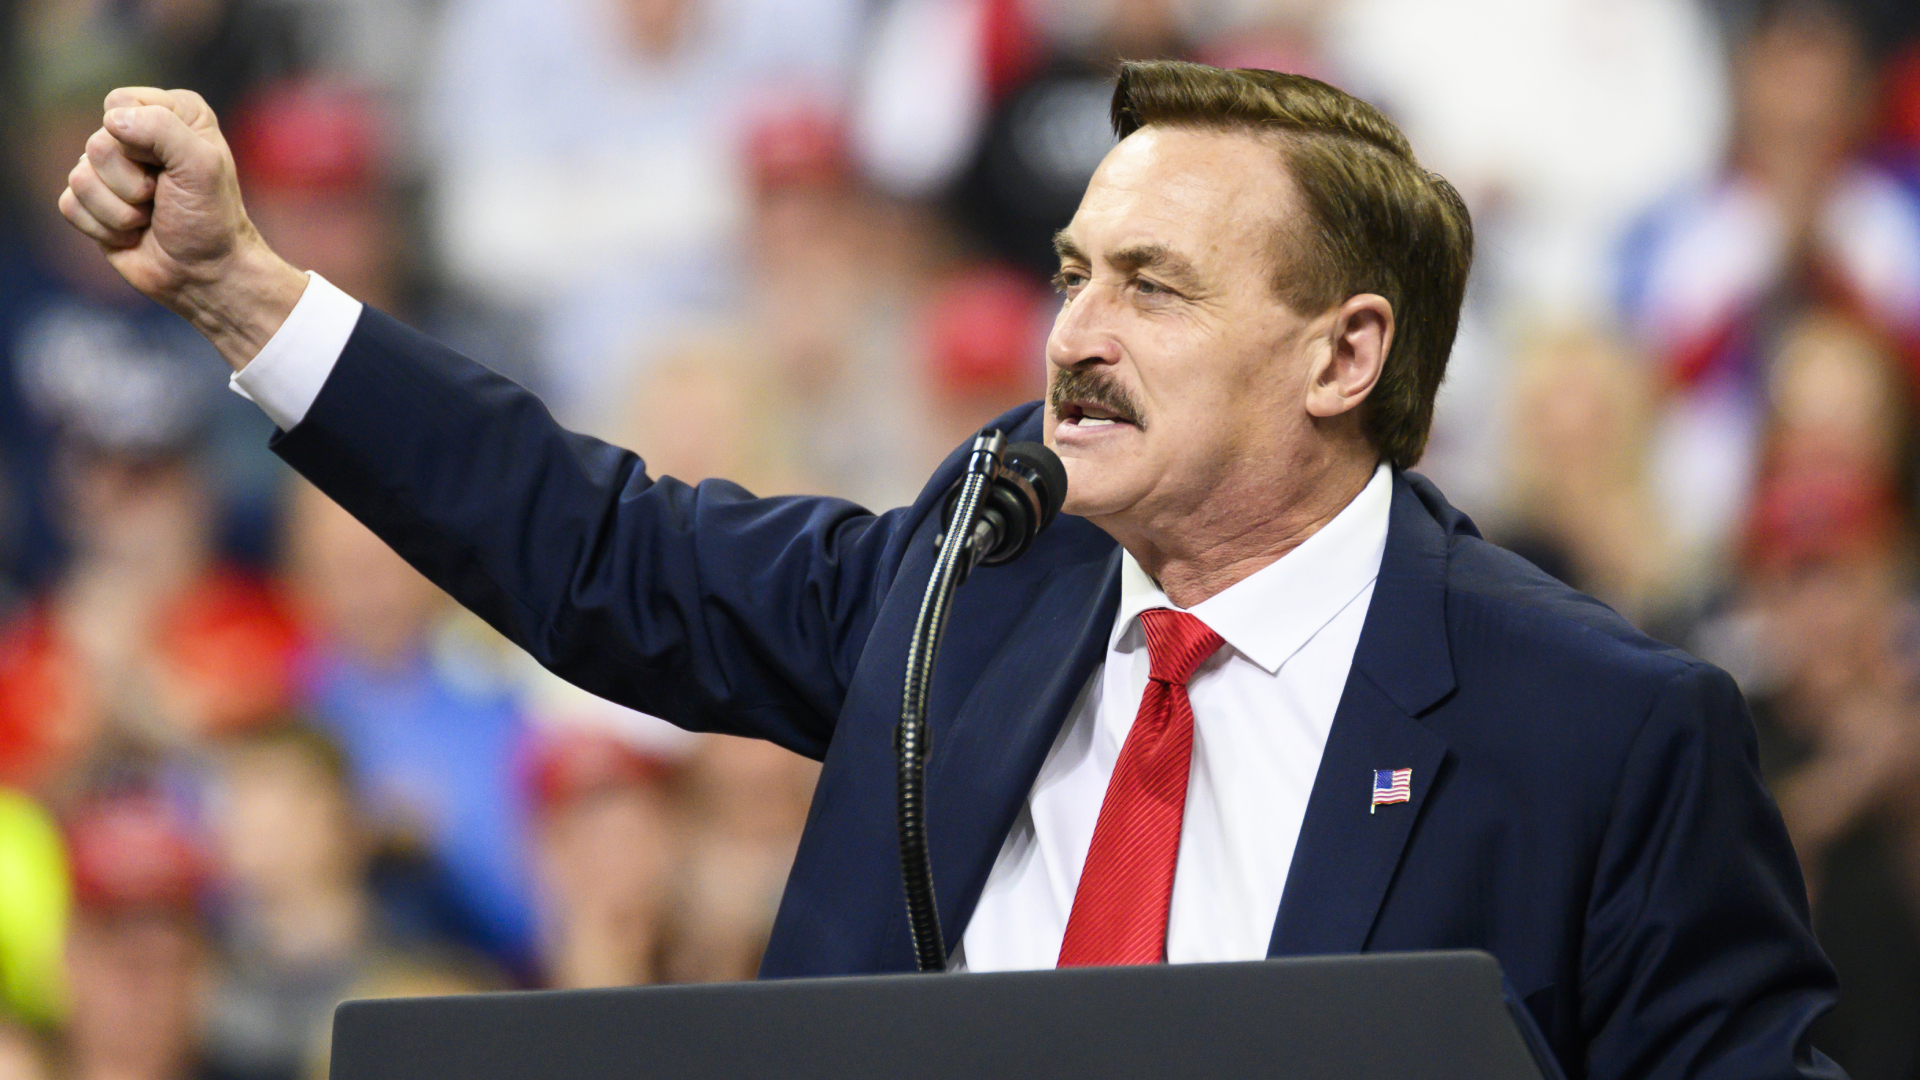 Mike Lindell: We Cannot Give Up as What’s Coming Next Is Communism